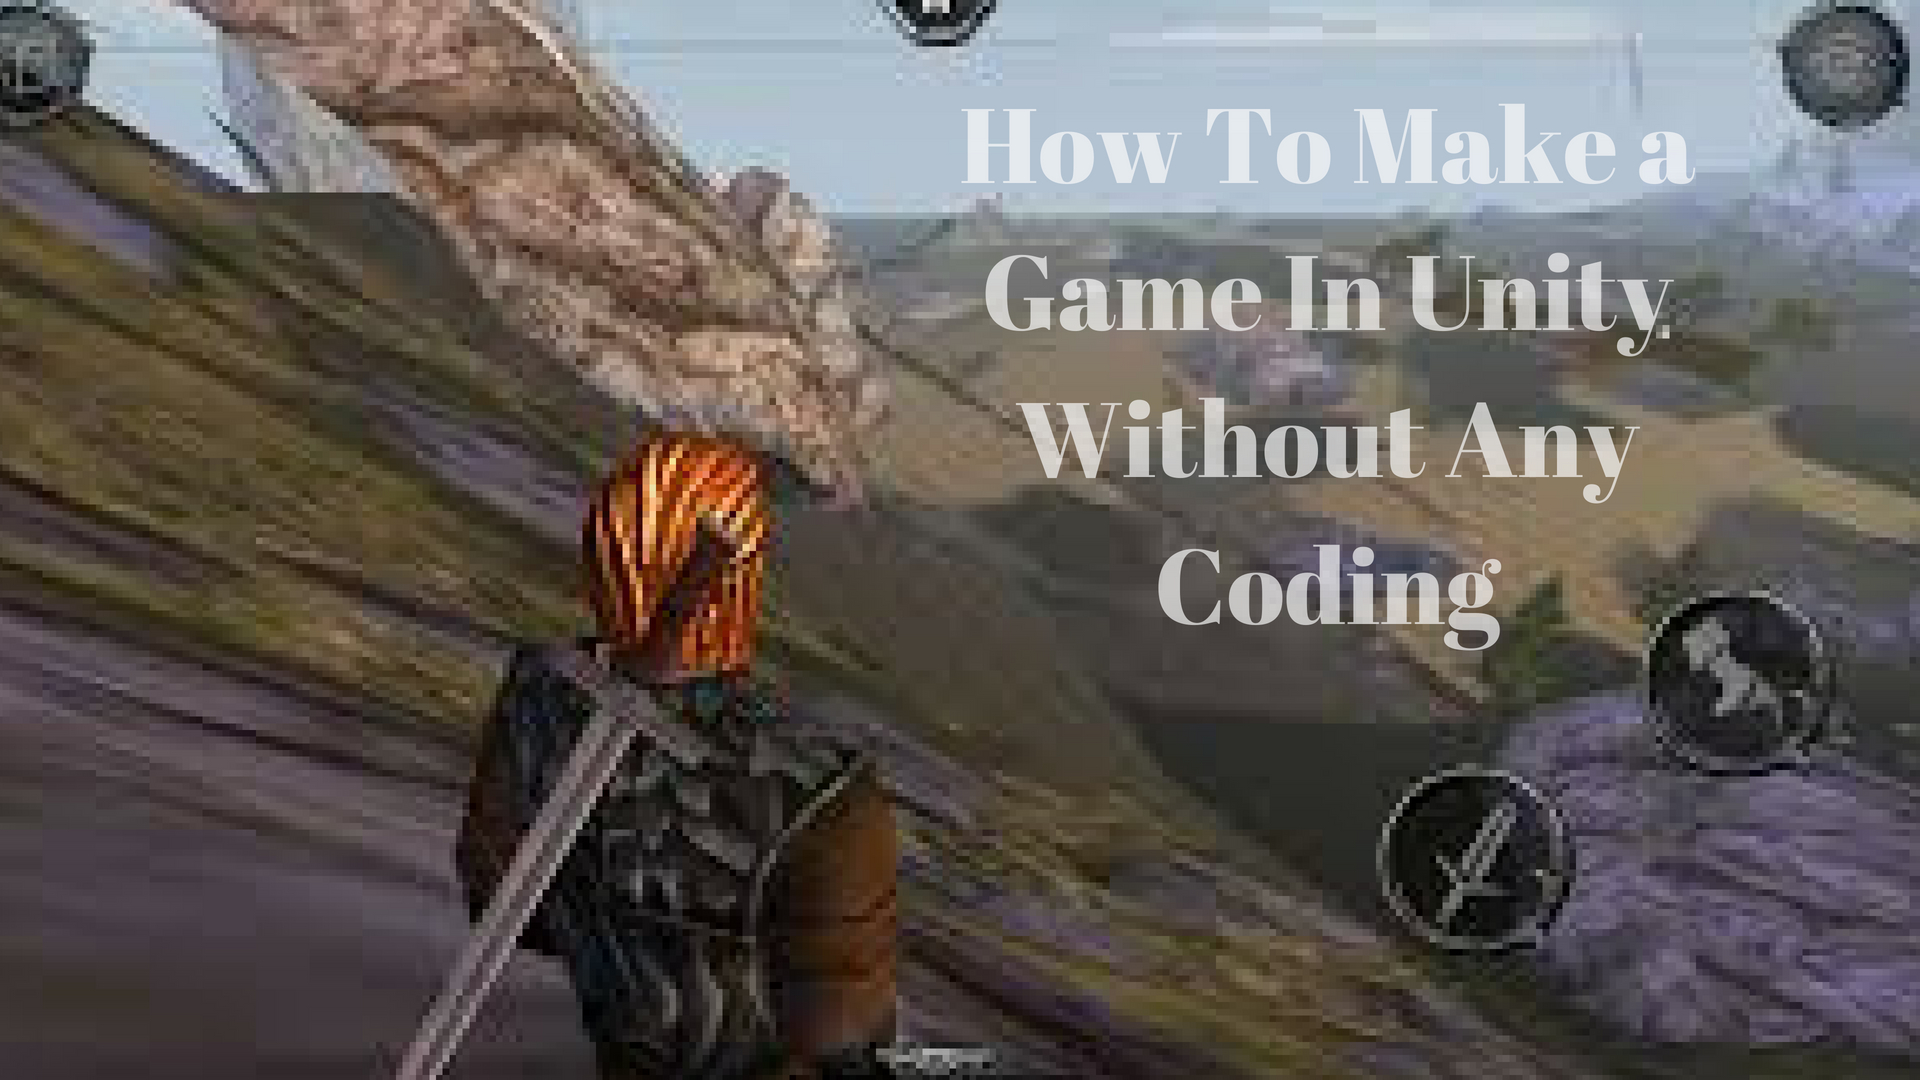 How to make games without coding 